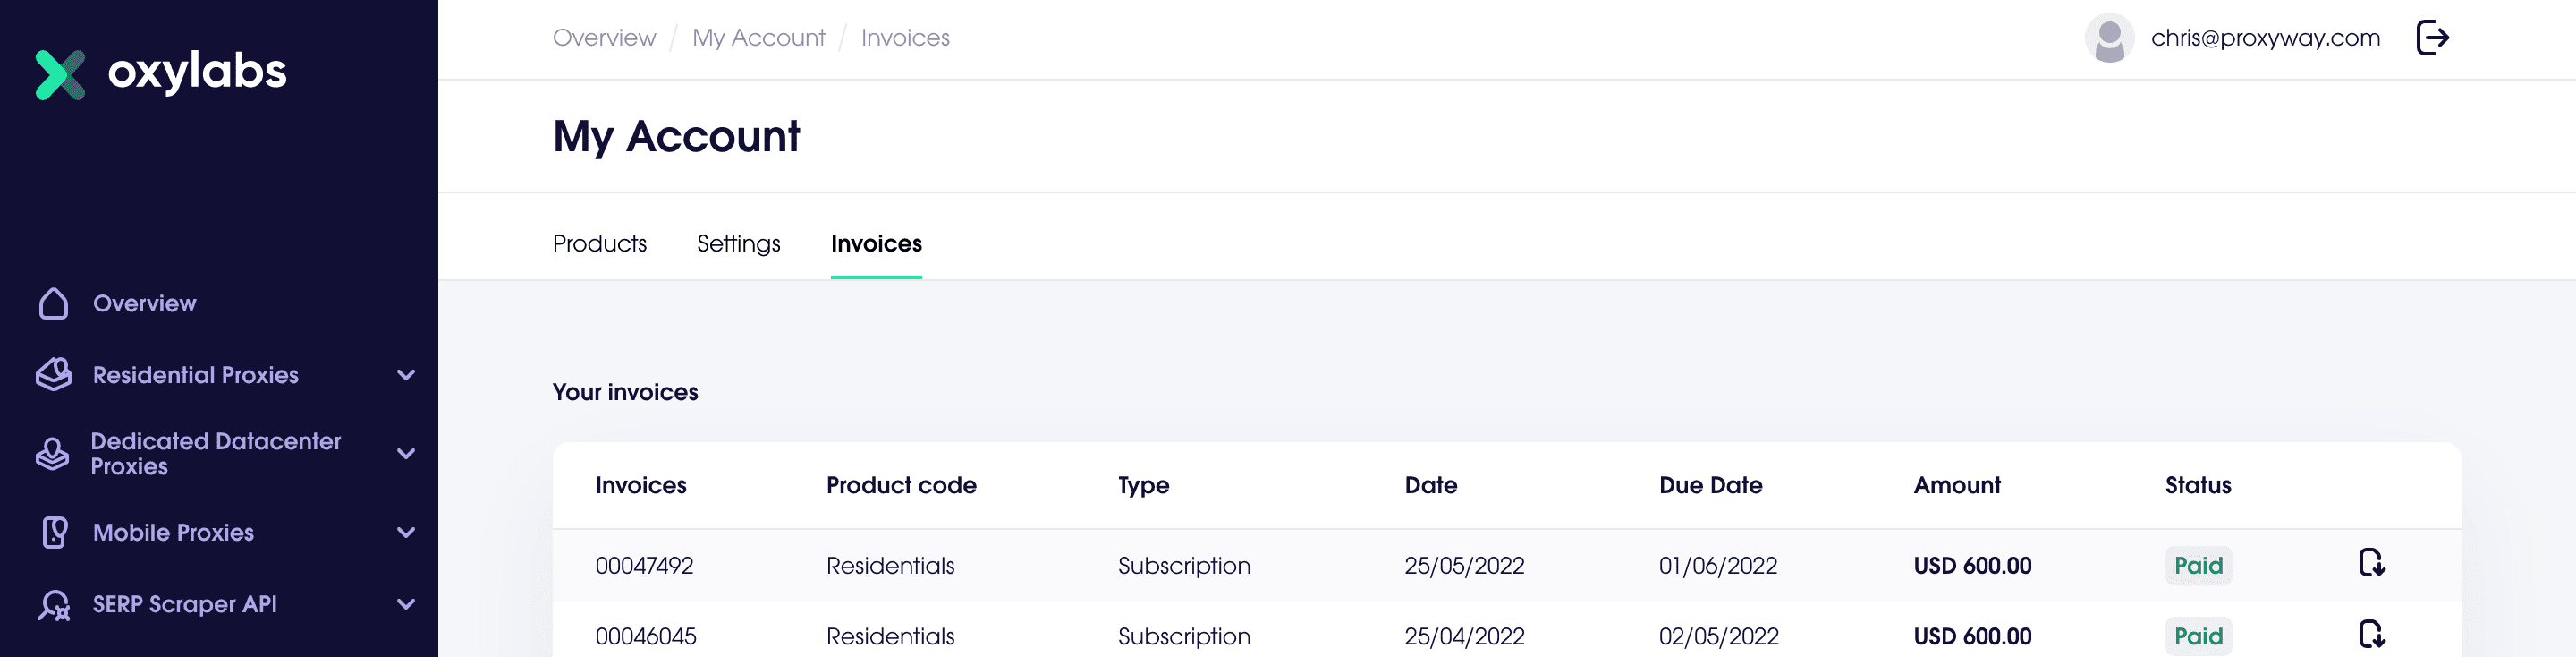 oxylabs dashboard invoices